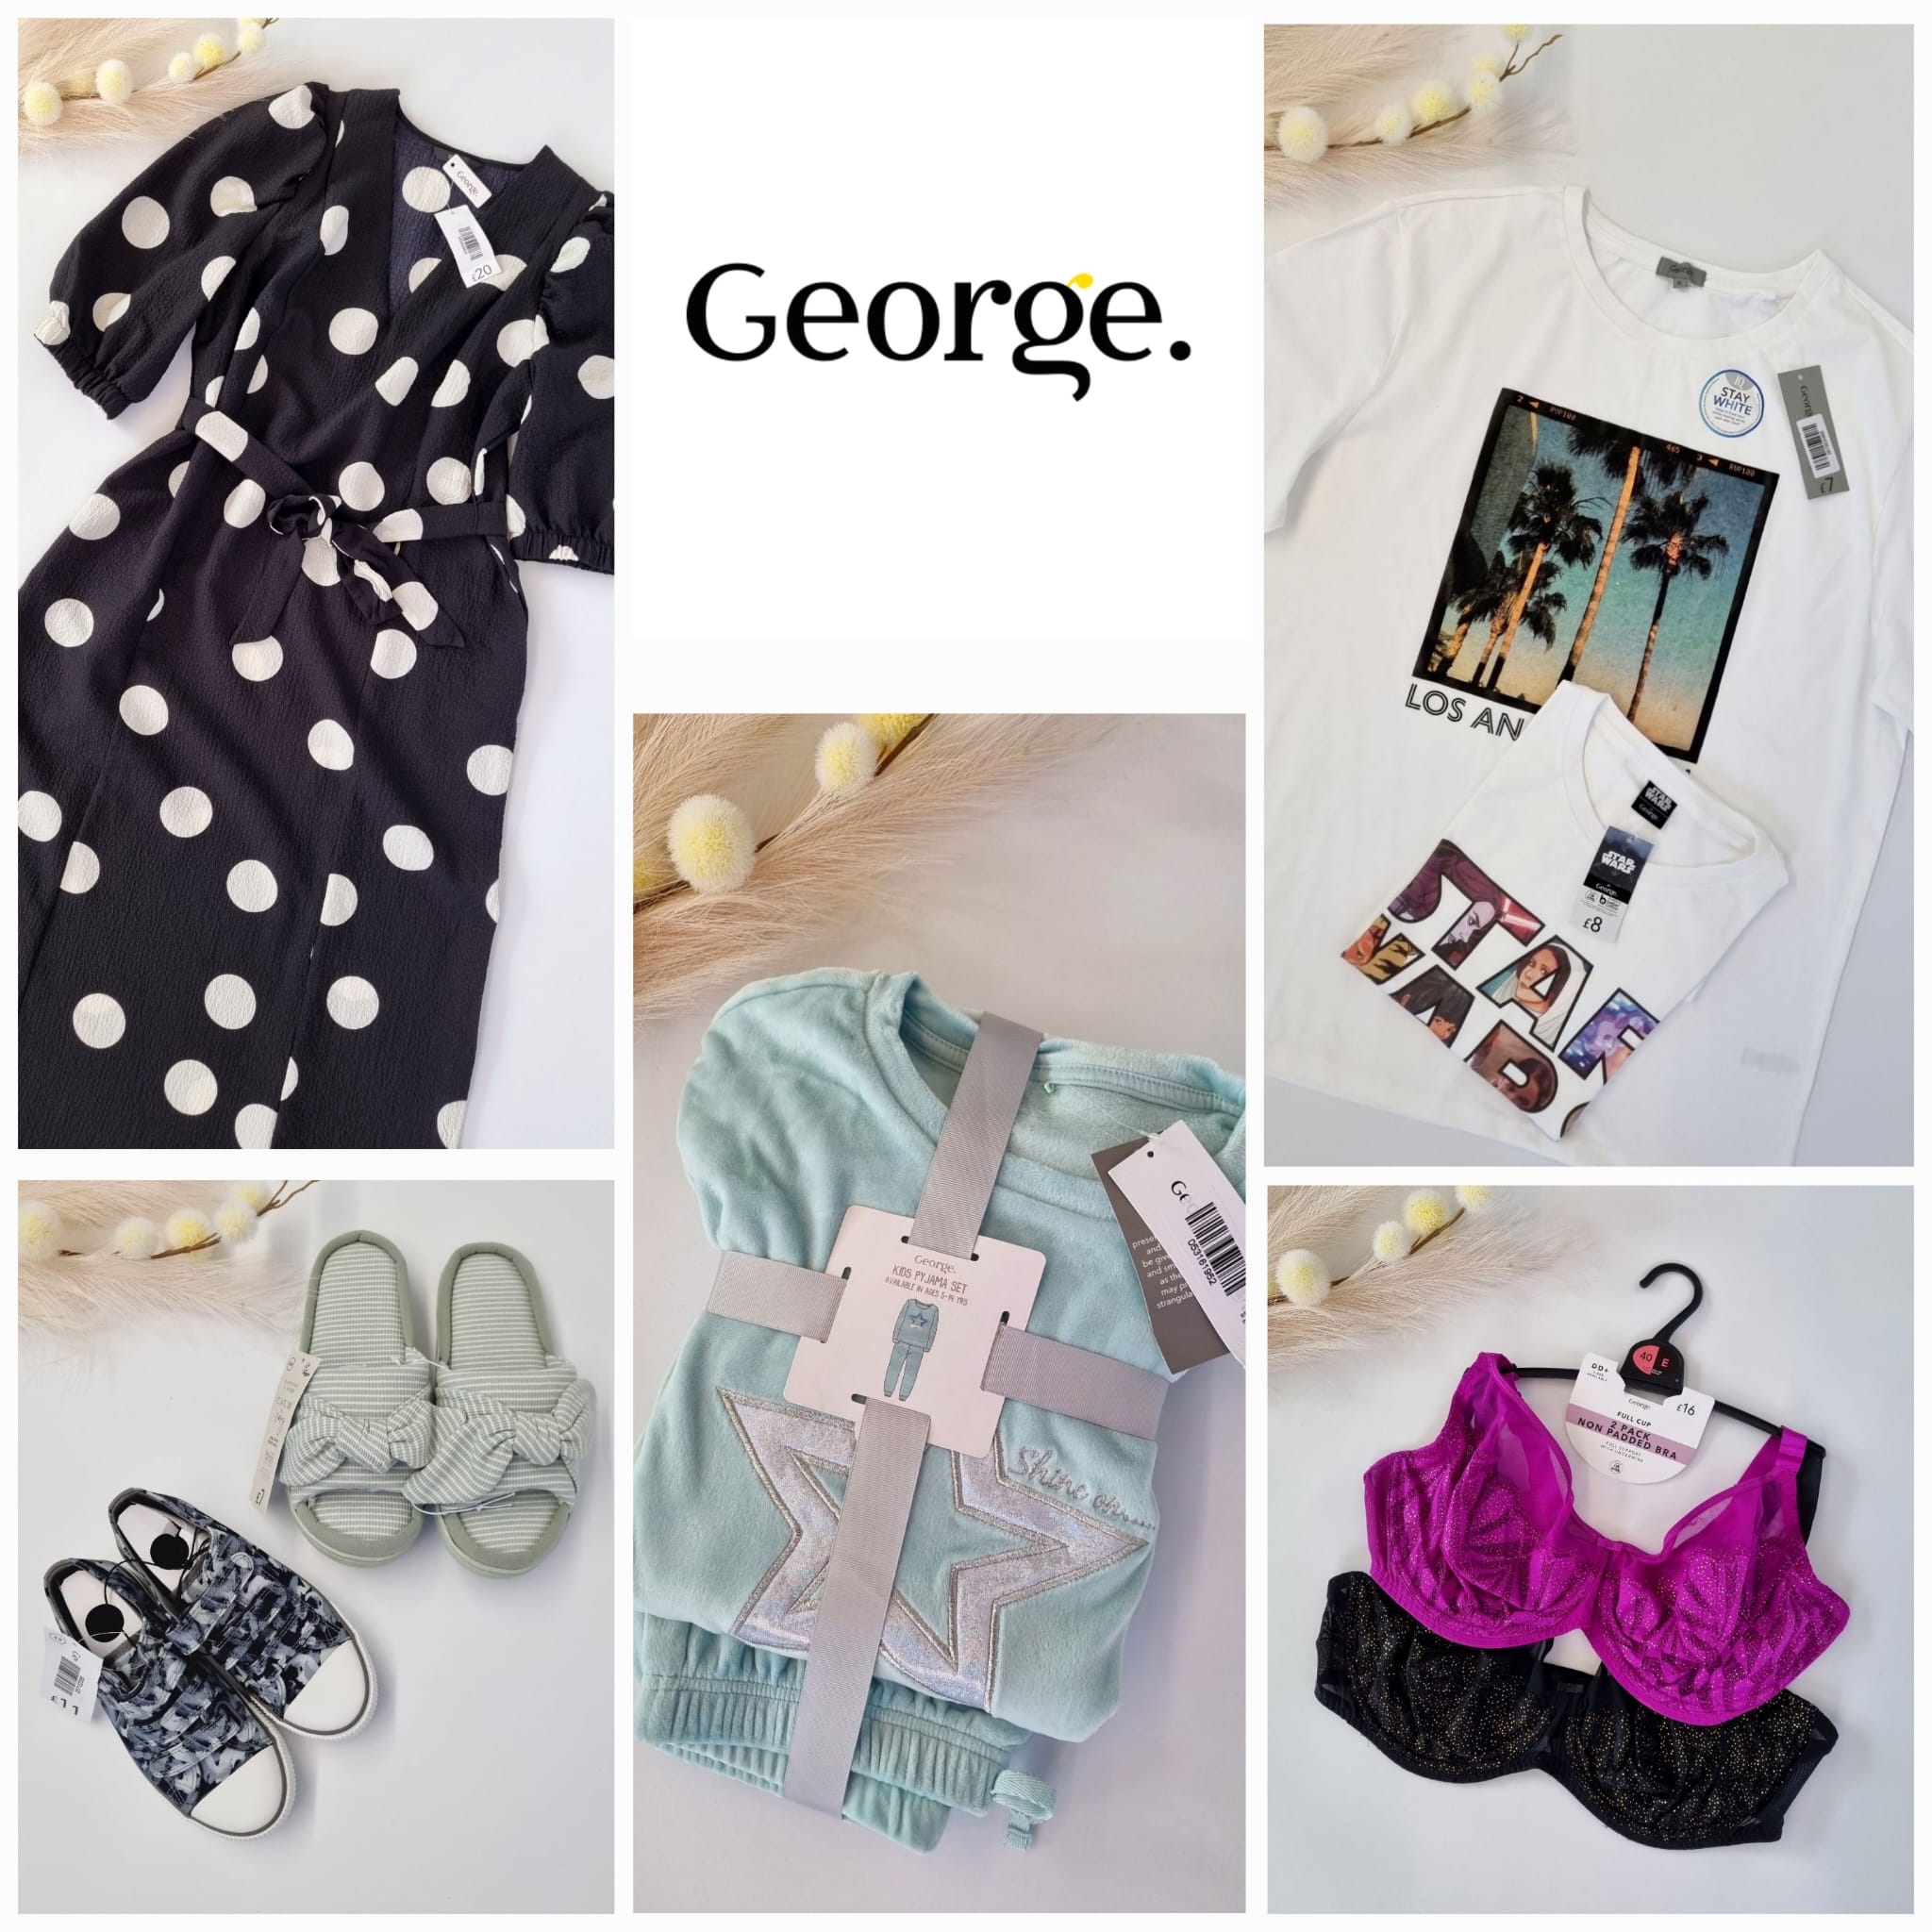 A mix of clothing and accessories from George